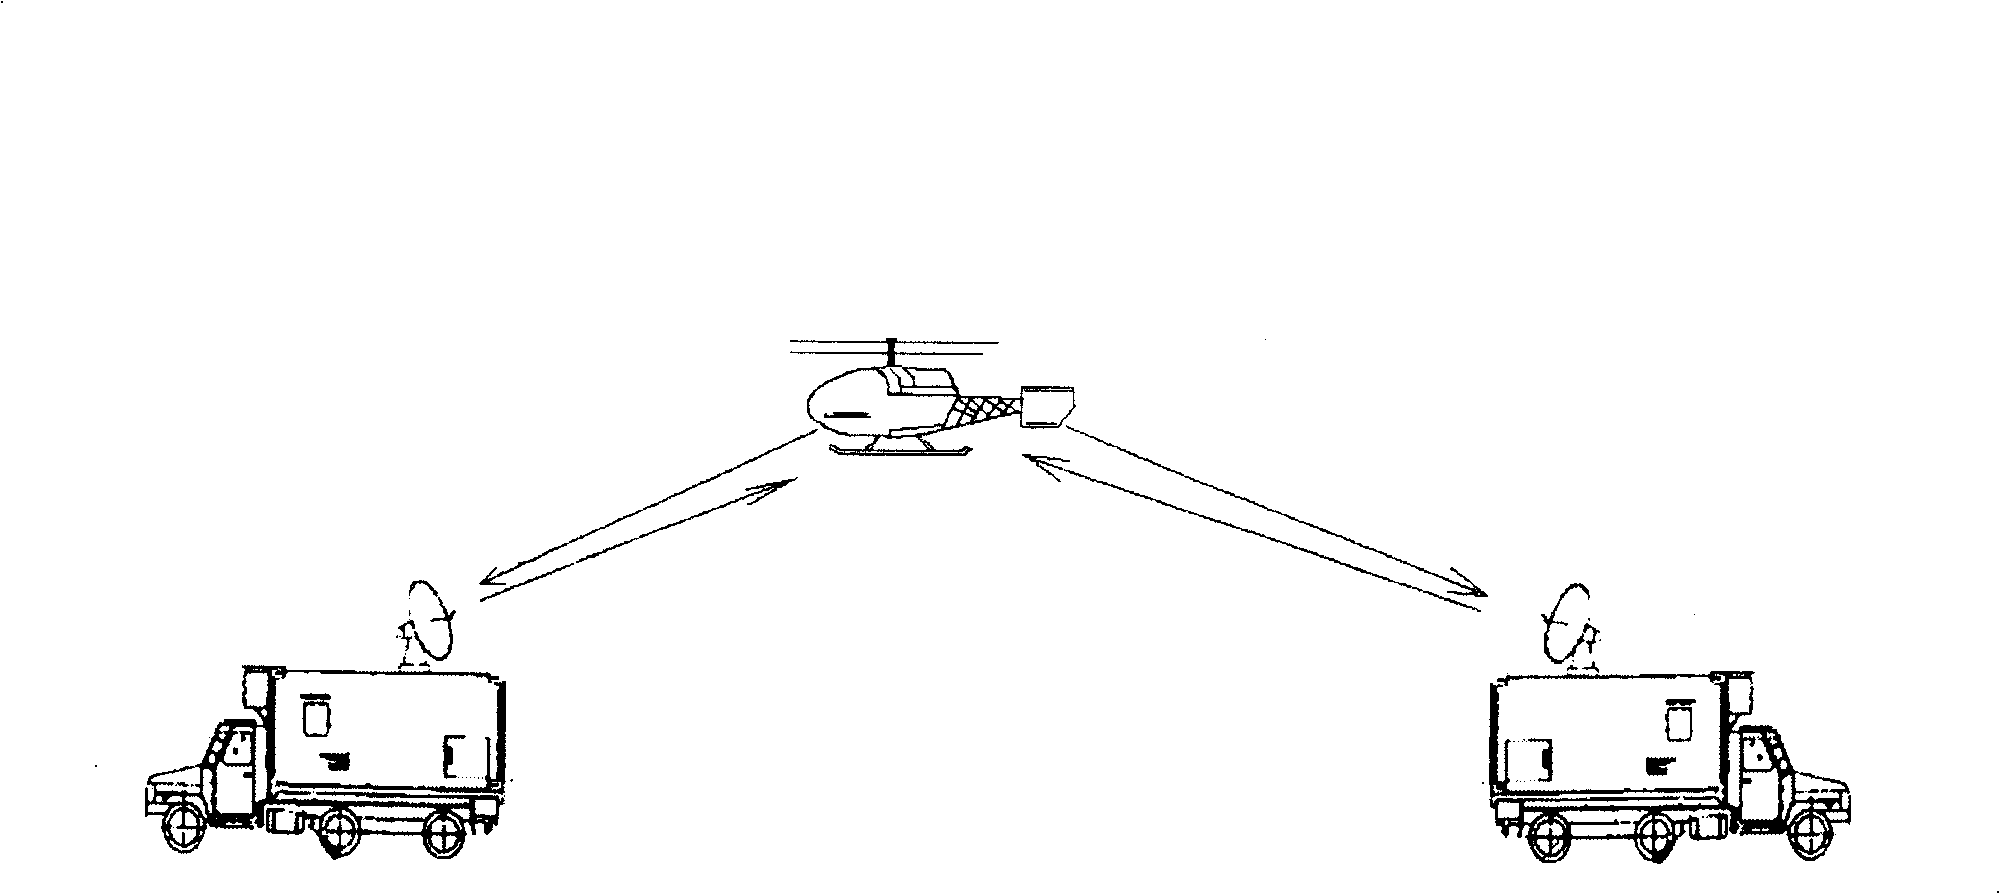 Double measurement and control system in use for coaxial dual rotors of unmanned helicopter